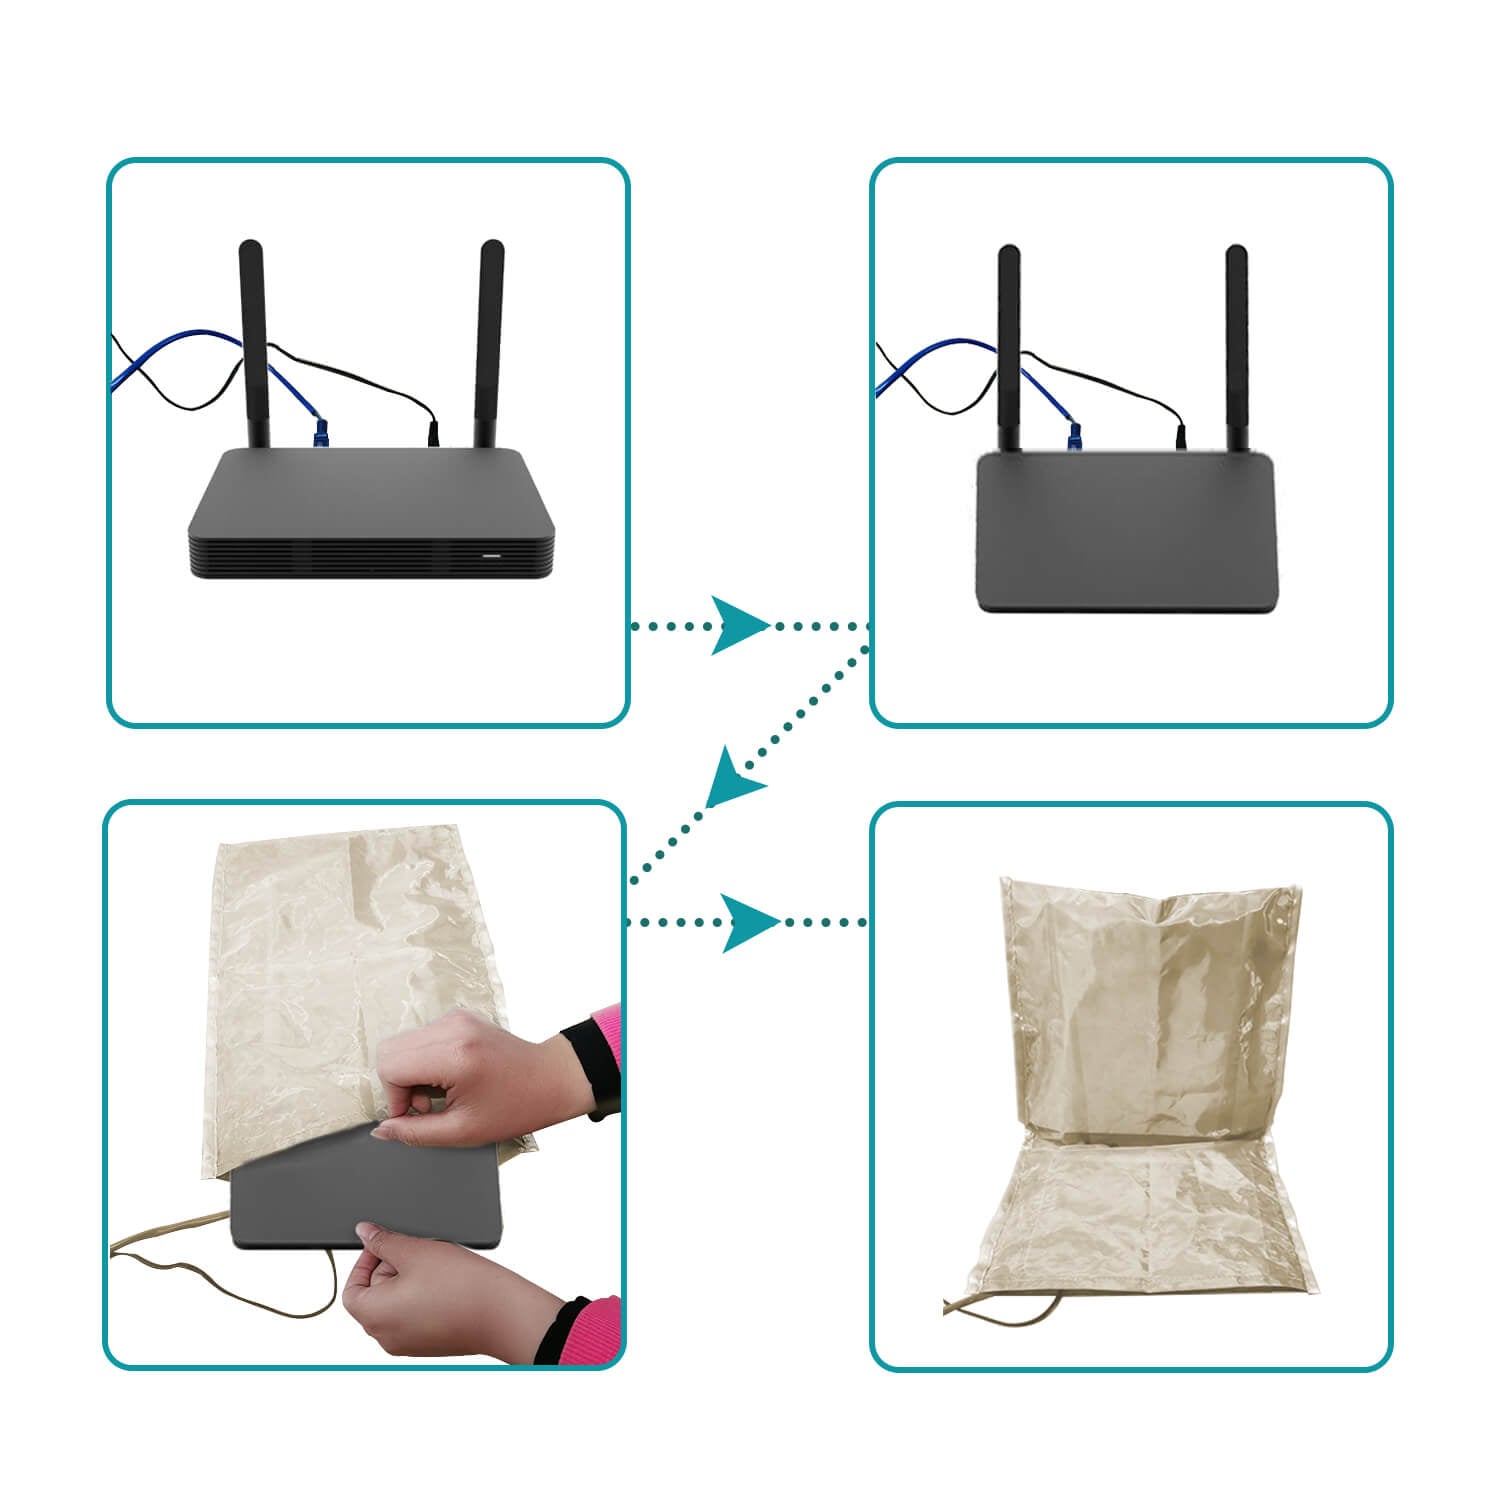 LARGE 35cm X 40cm Universal WiFi Router Signal Tamer - Effectively Reduces Radiation and EMF Emissions - GroundedKiwi.nzWifi Router Signal Tamer Wifi Router Signal Tamerbagblockingcover